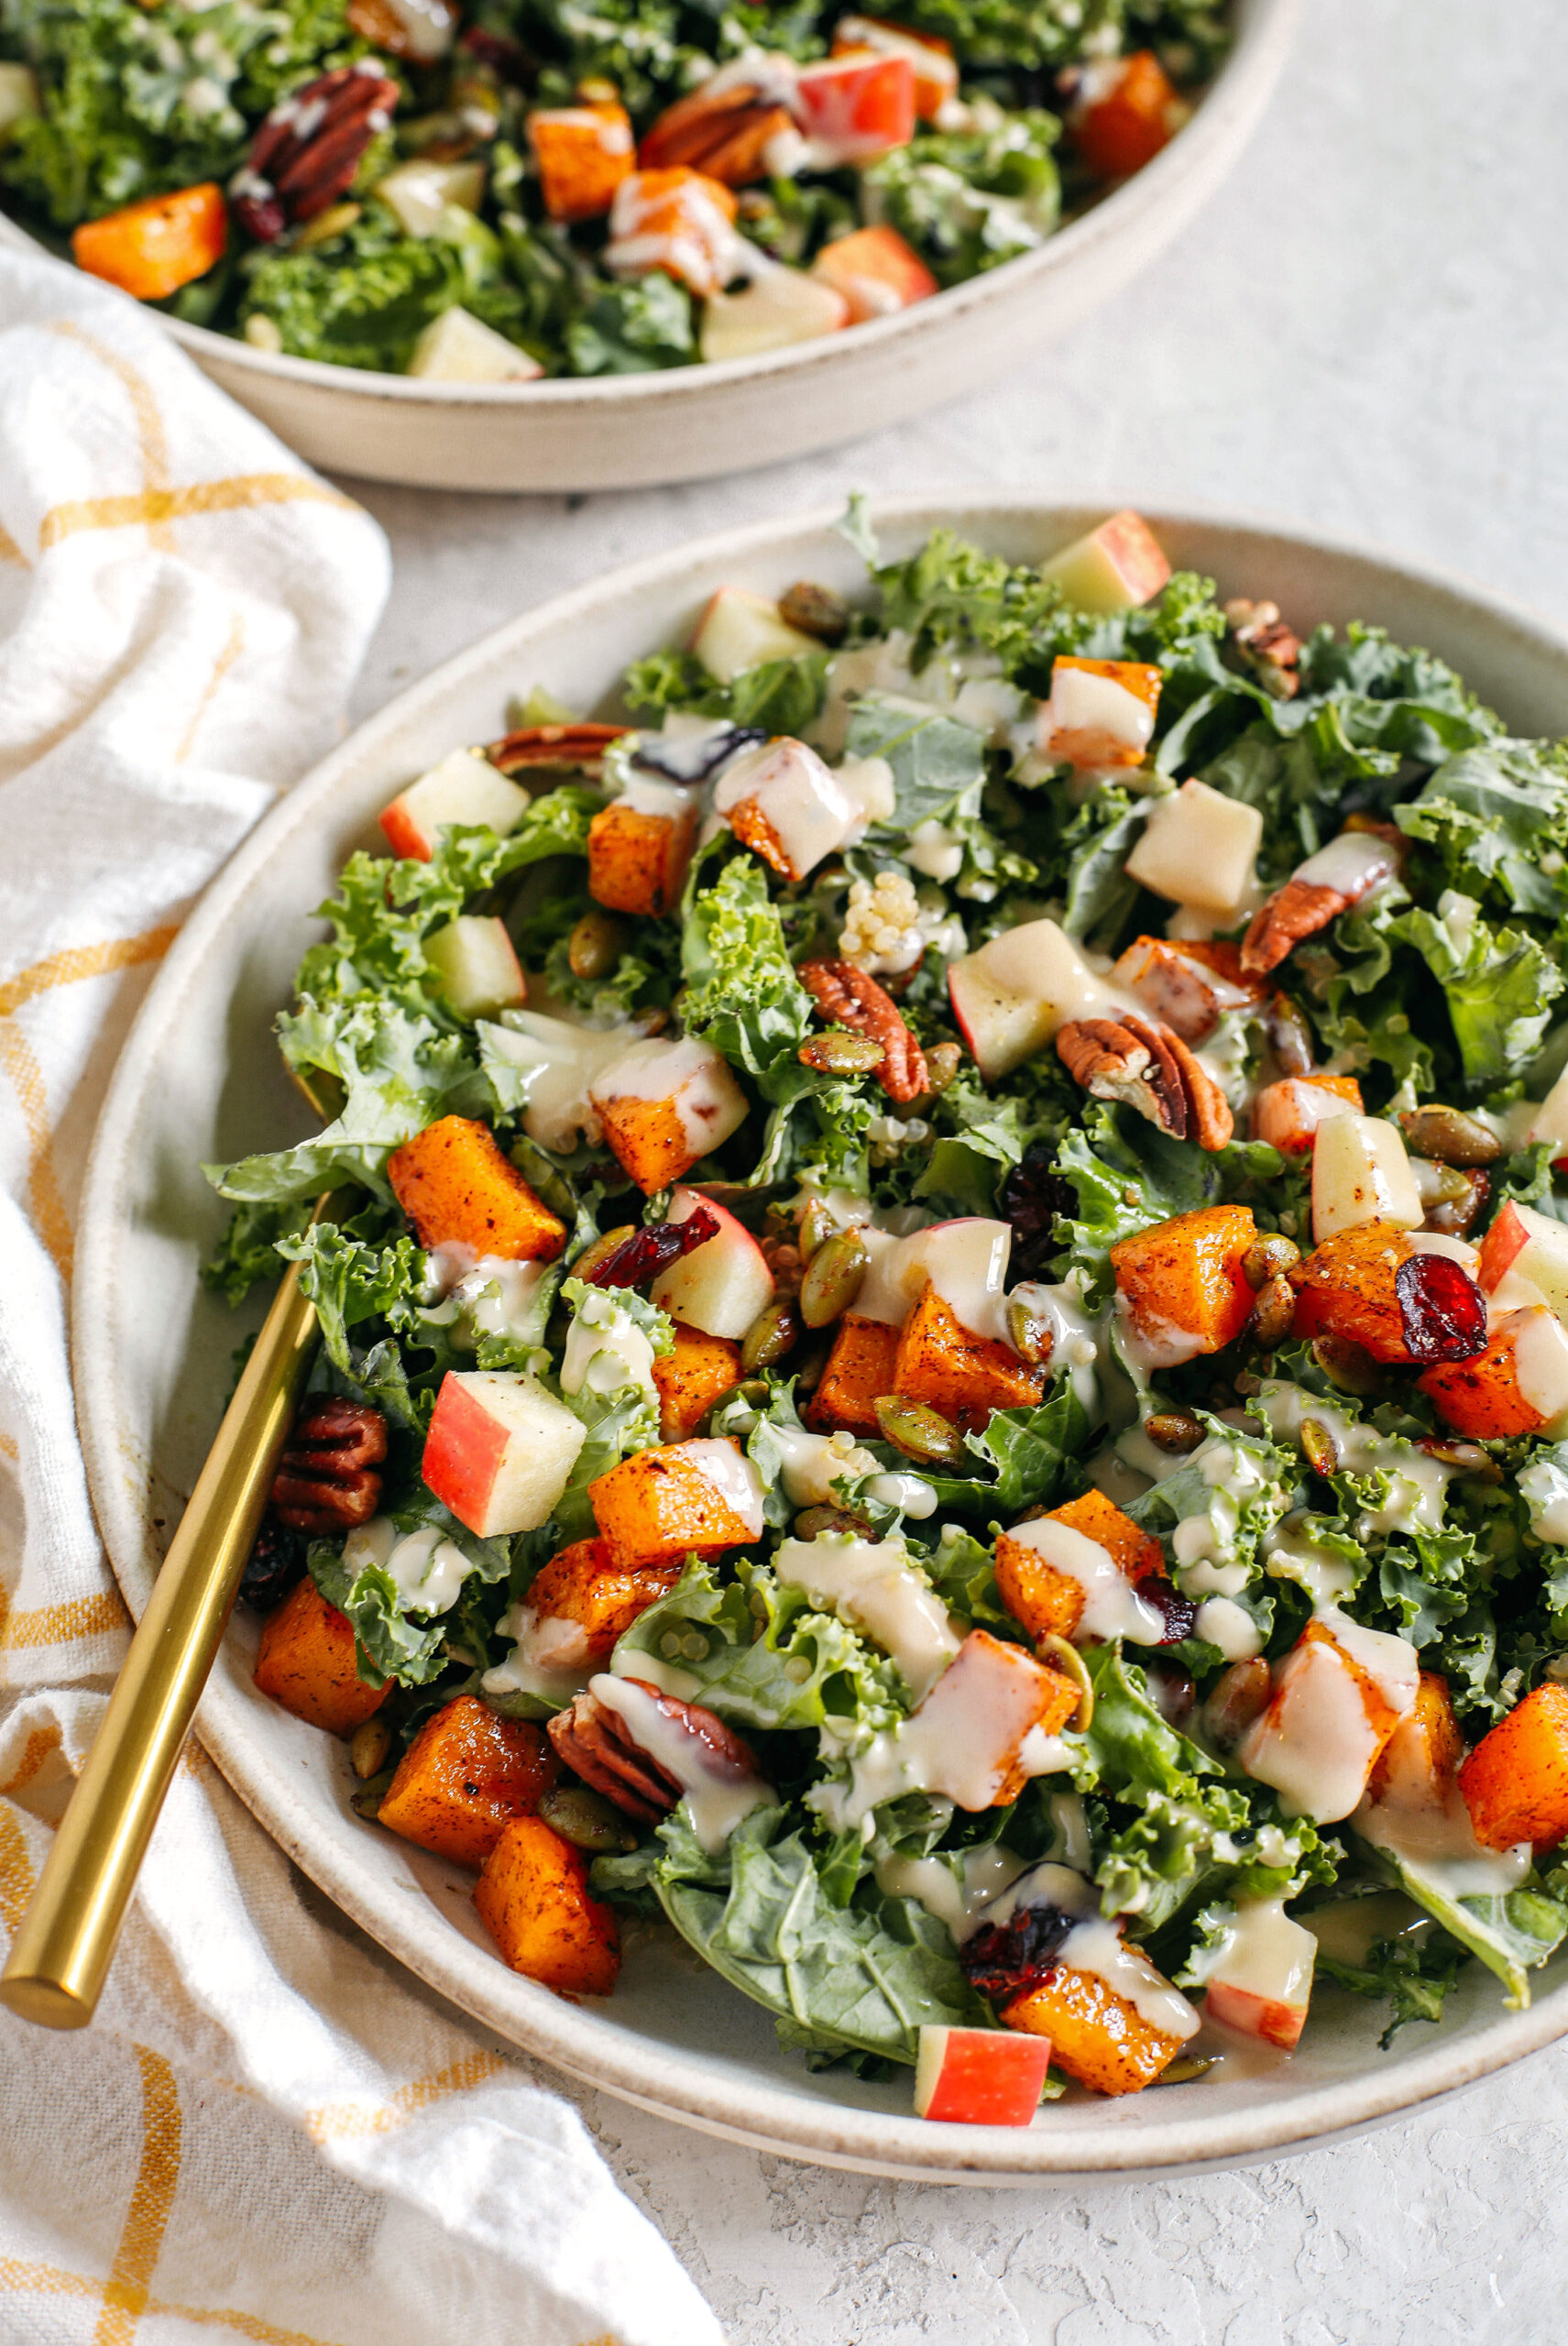 The ultimate powerhouse Fall Salad made with leafy kale, protein-packed quinoa, crisp apples, roasted butternut squash, spiced pepitas and pecans, all drizzled in the most delicious maple tahini dressing!